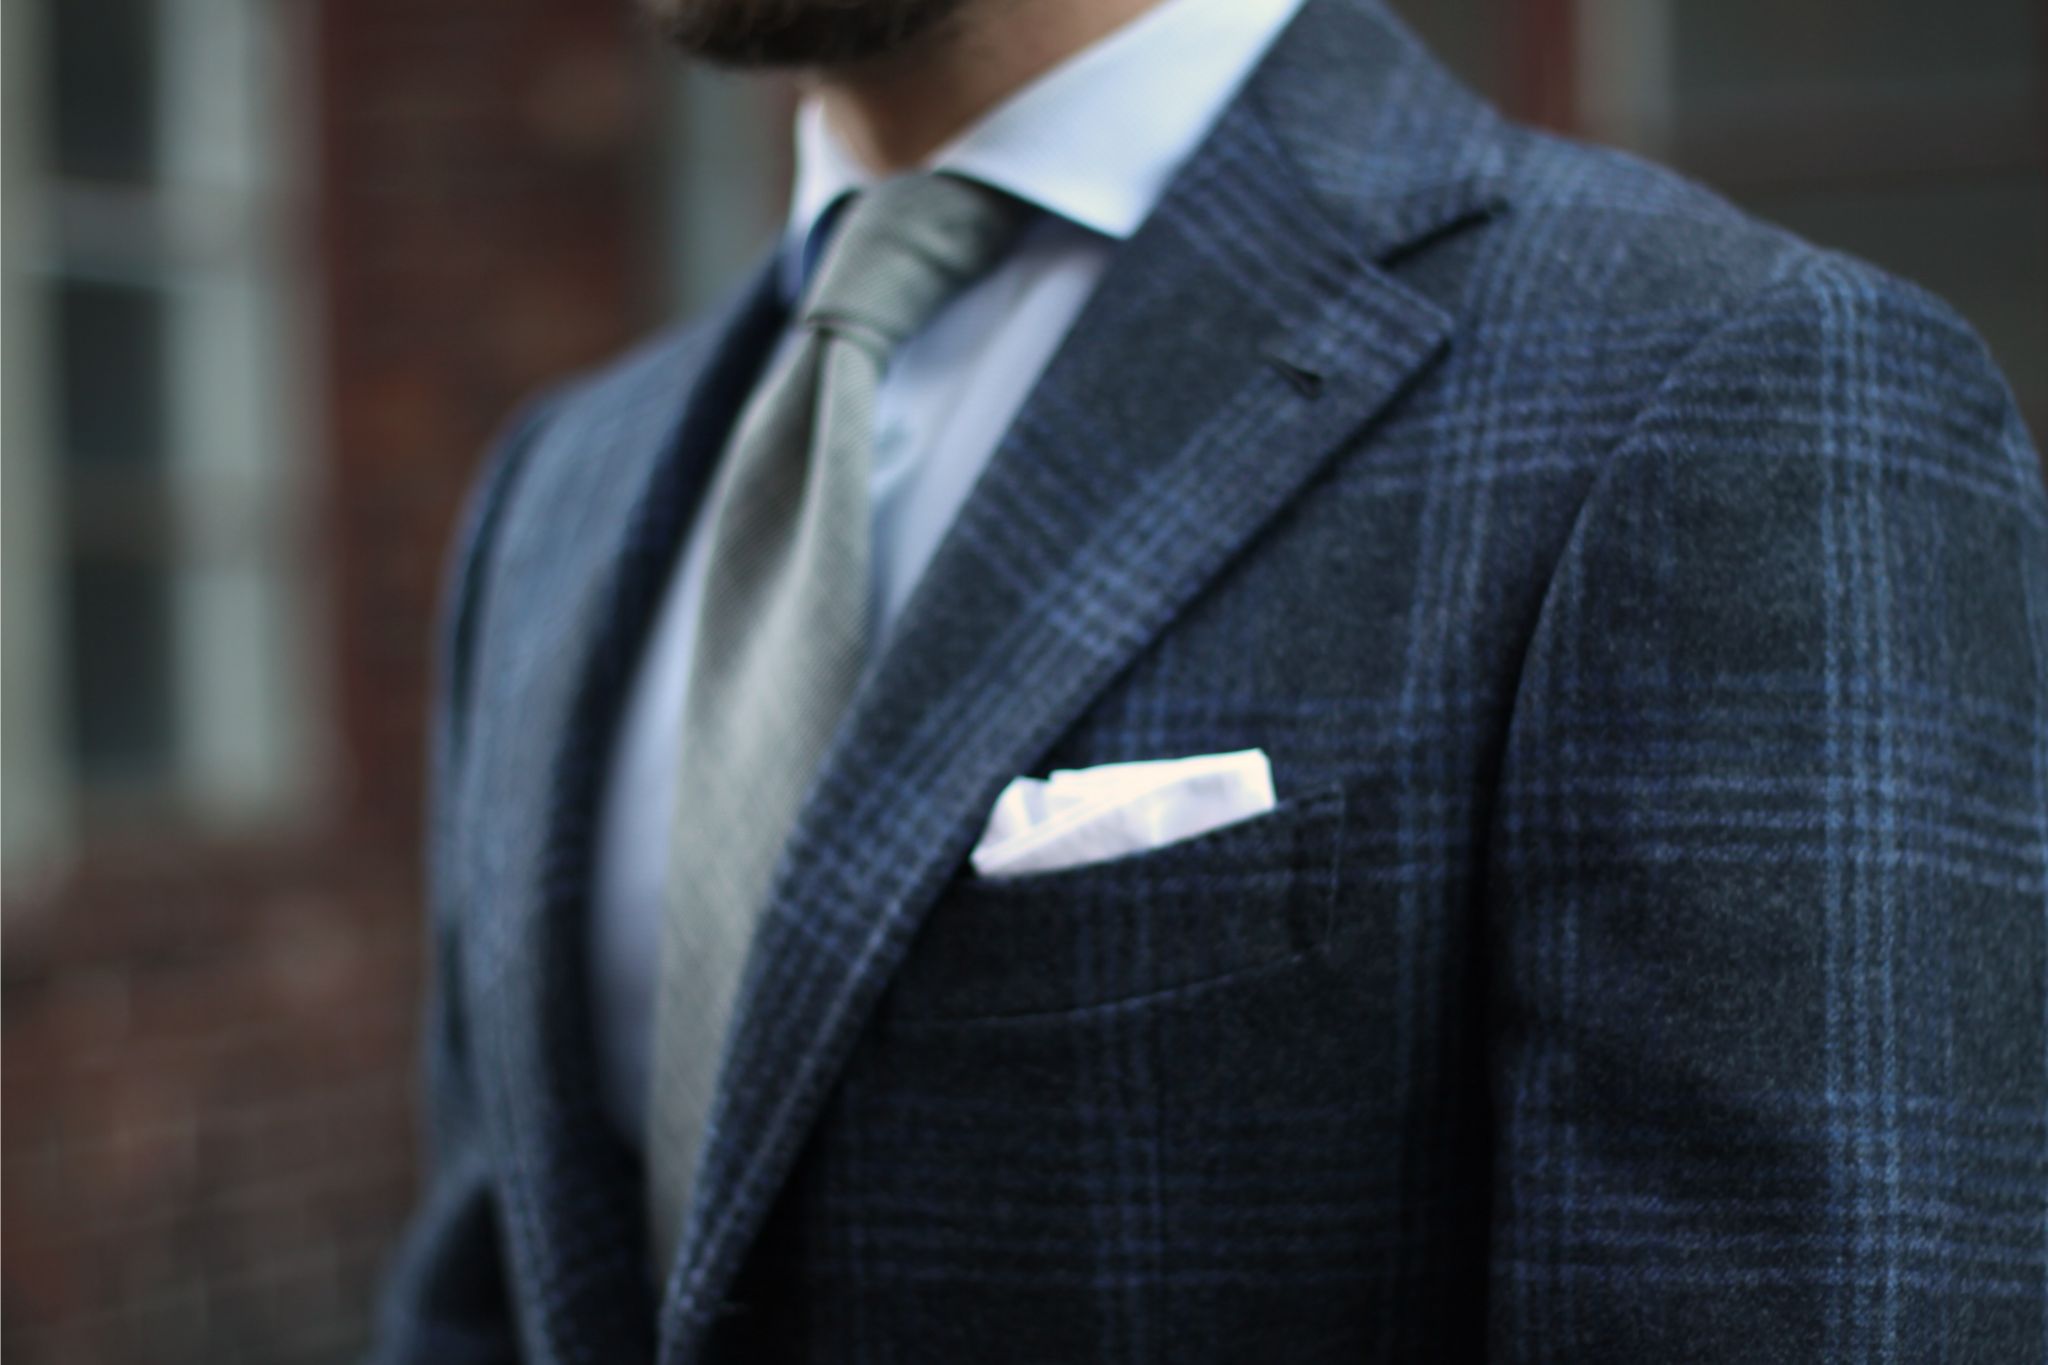 G.Abo Napoli suit details - gray suit with white pocket square